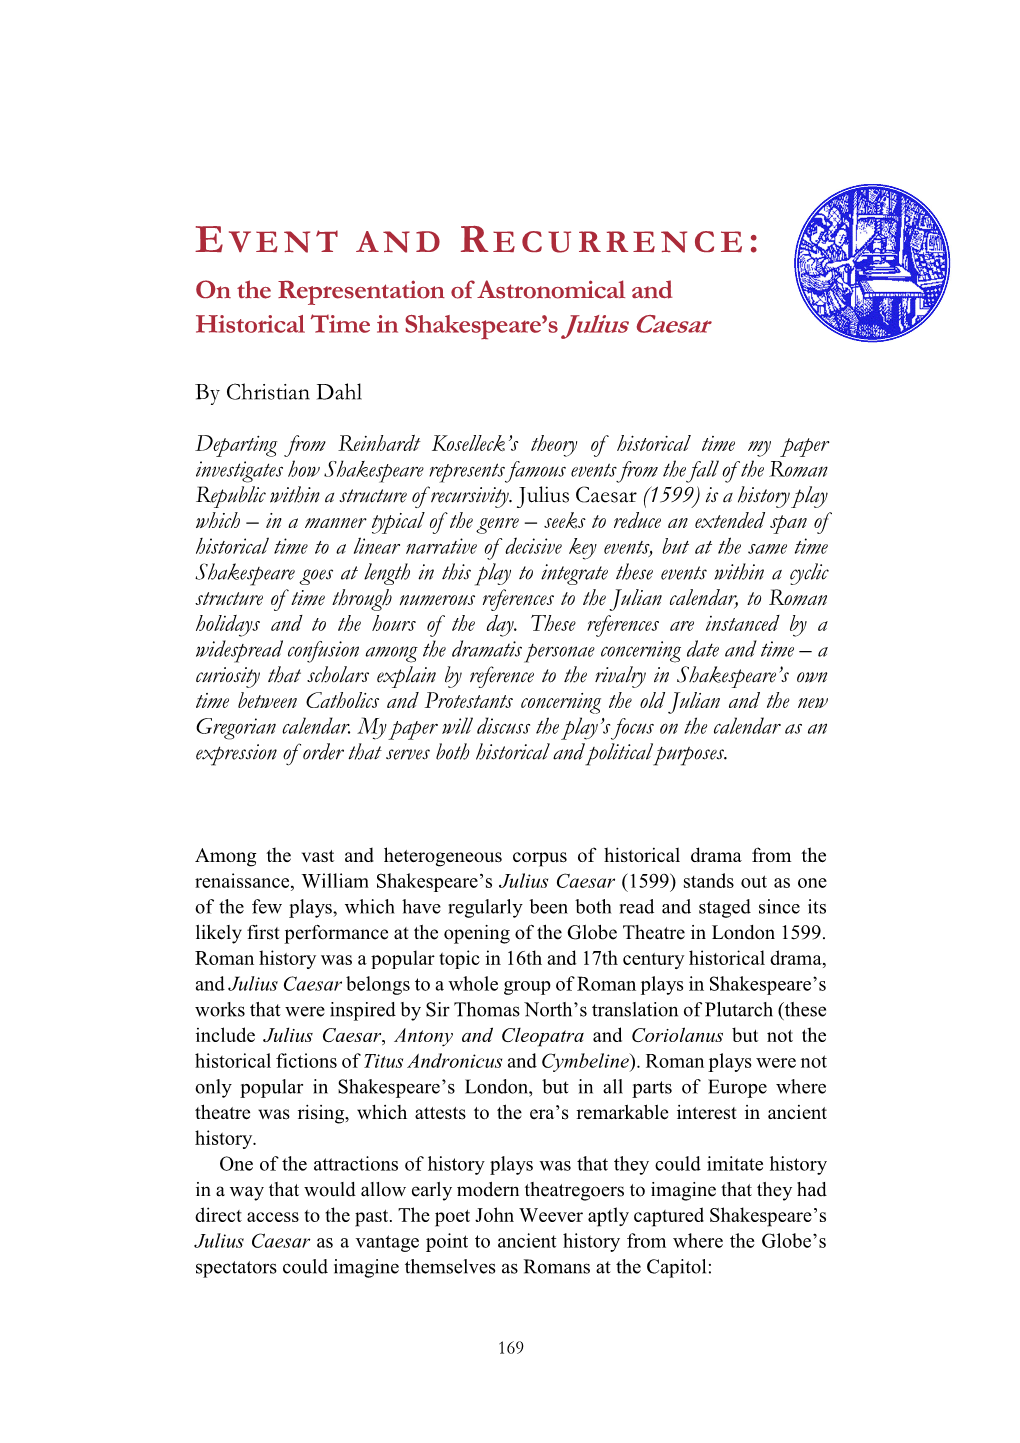 Event and Recurrence: on the Representation of Astronomical and Historical Time in Shakespeare's Julius Caesar